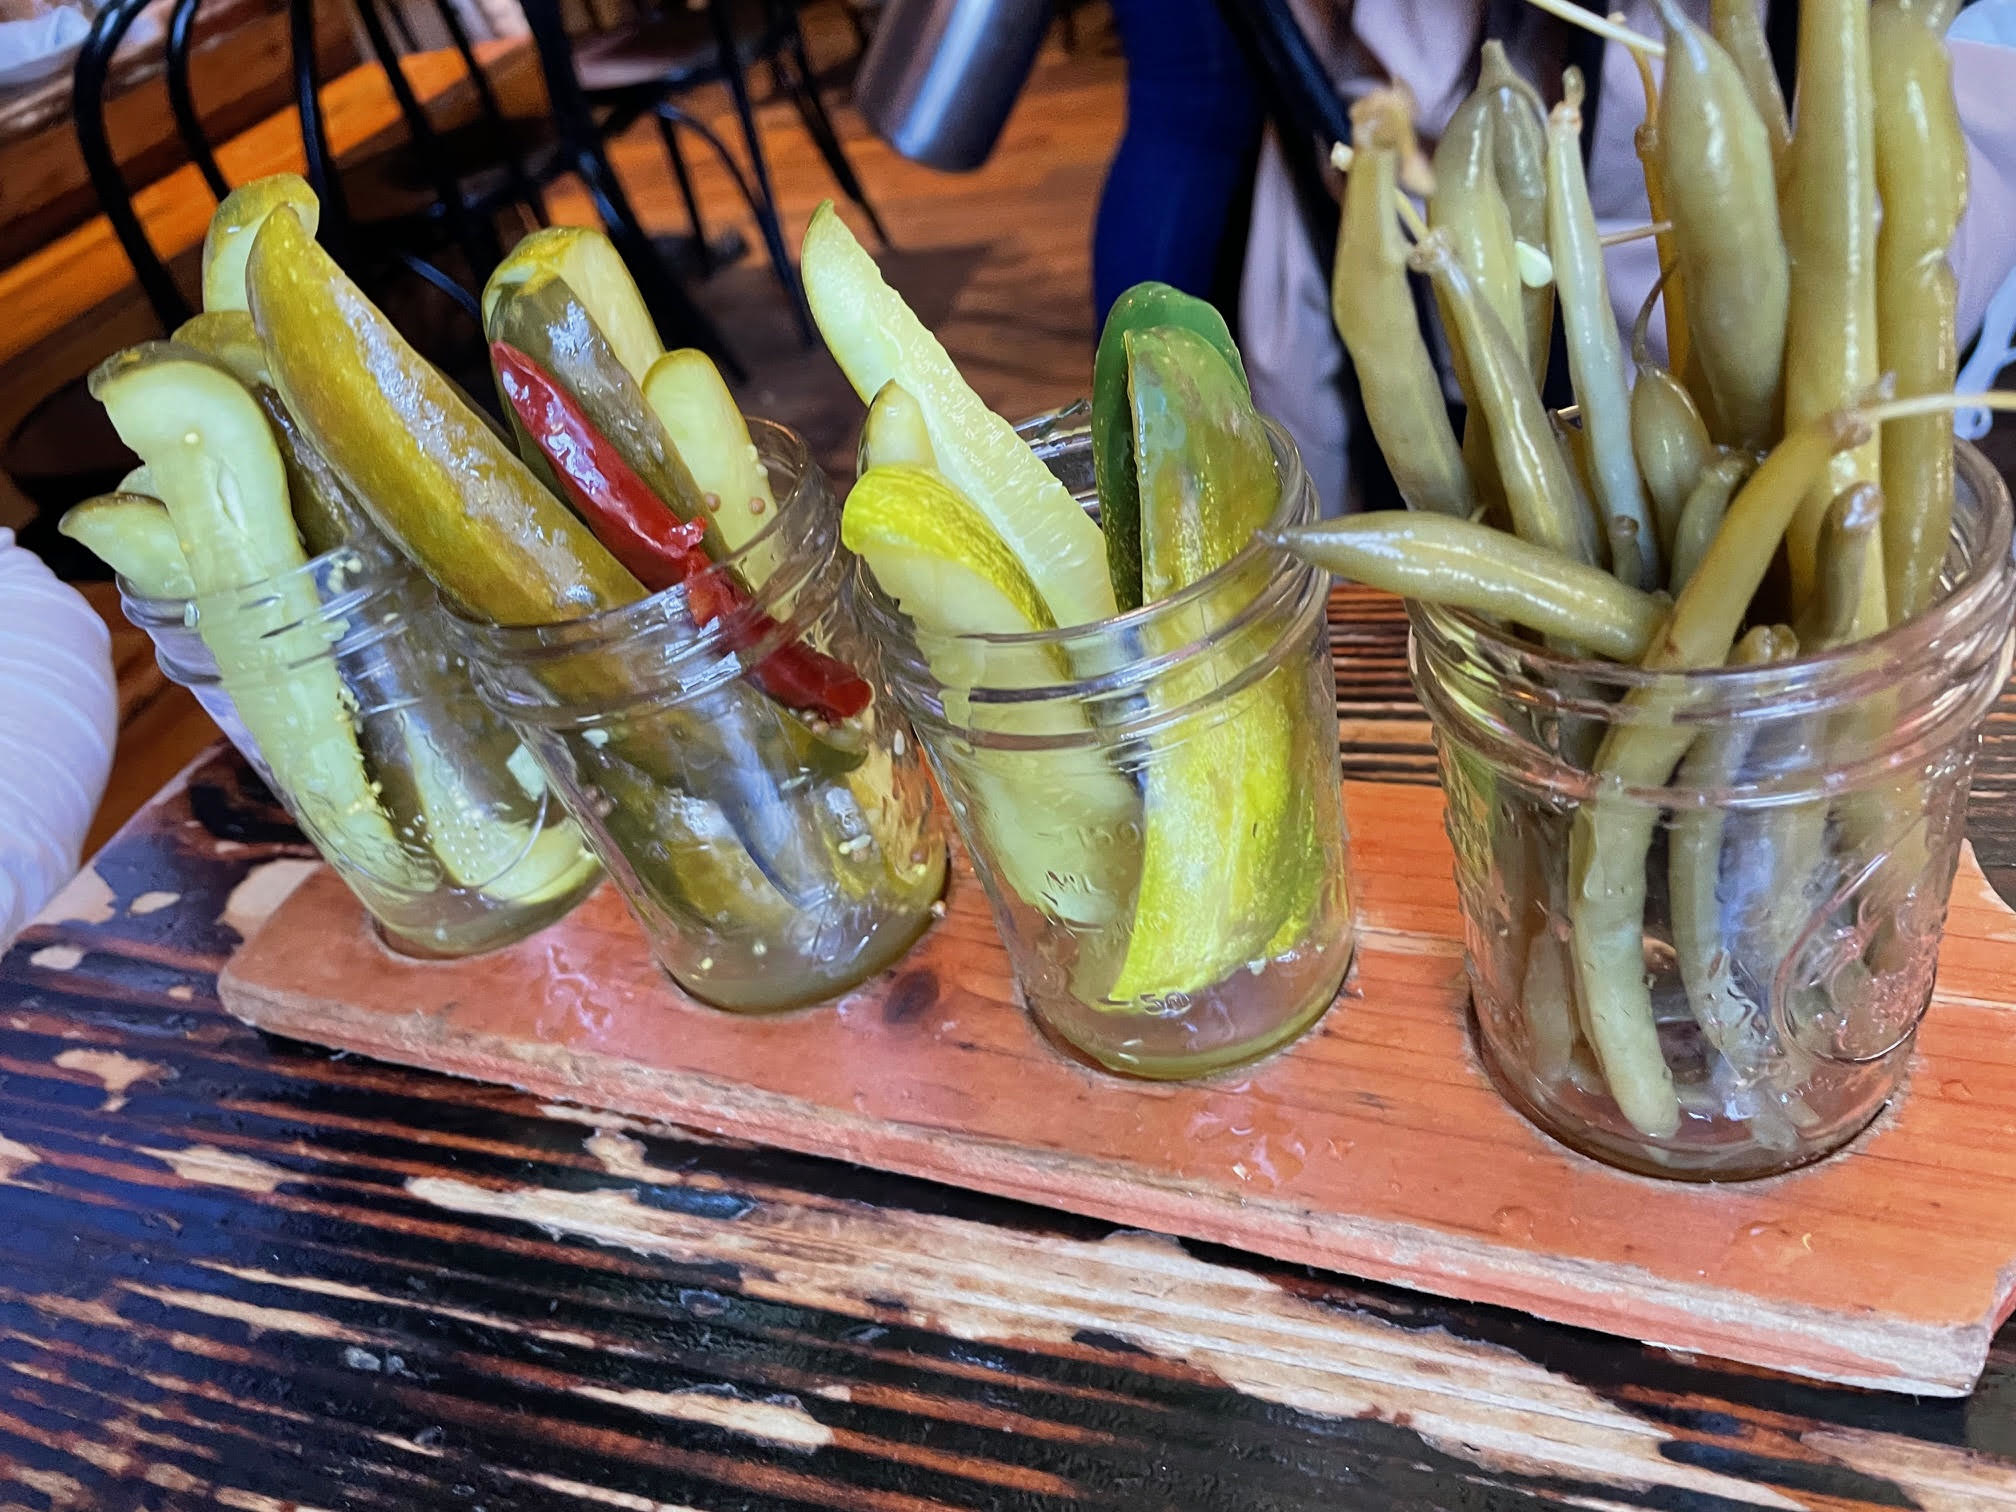 Pickles in jars on a wooden serving board